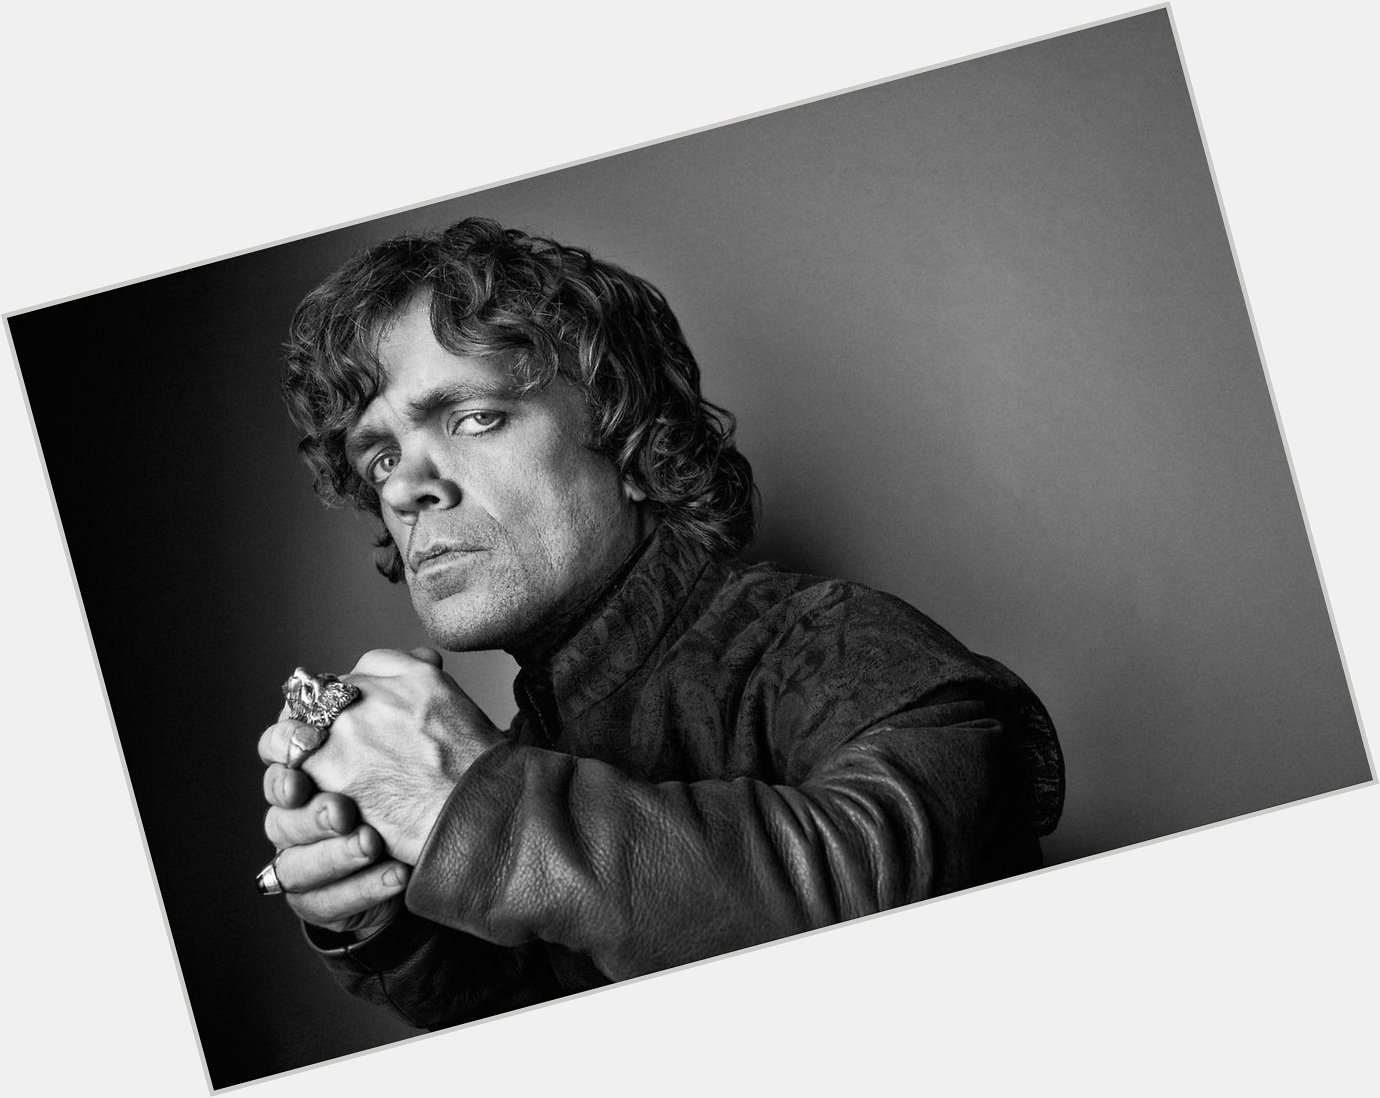 Happy 46th Birthday to Tyrion Lannister (aka Peter Dinklage )!  